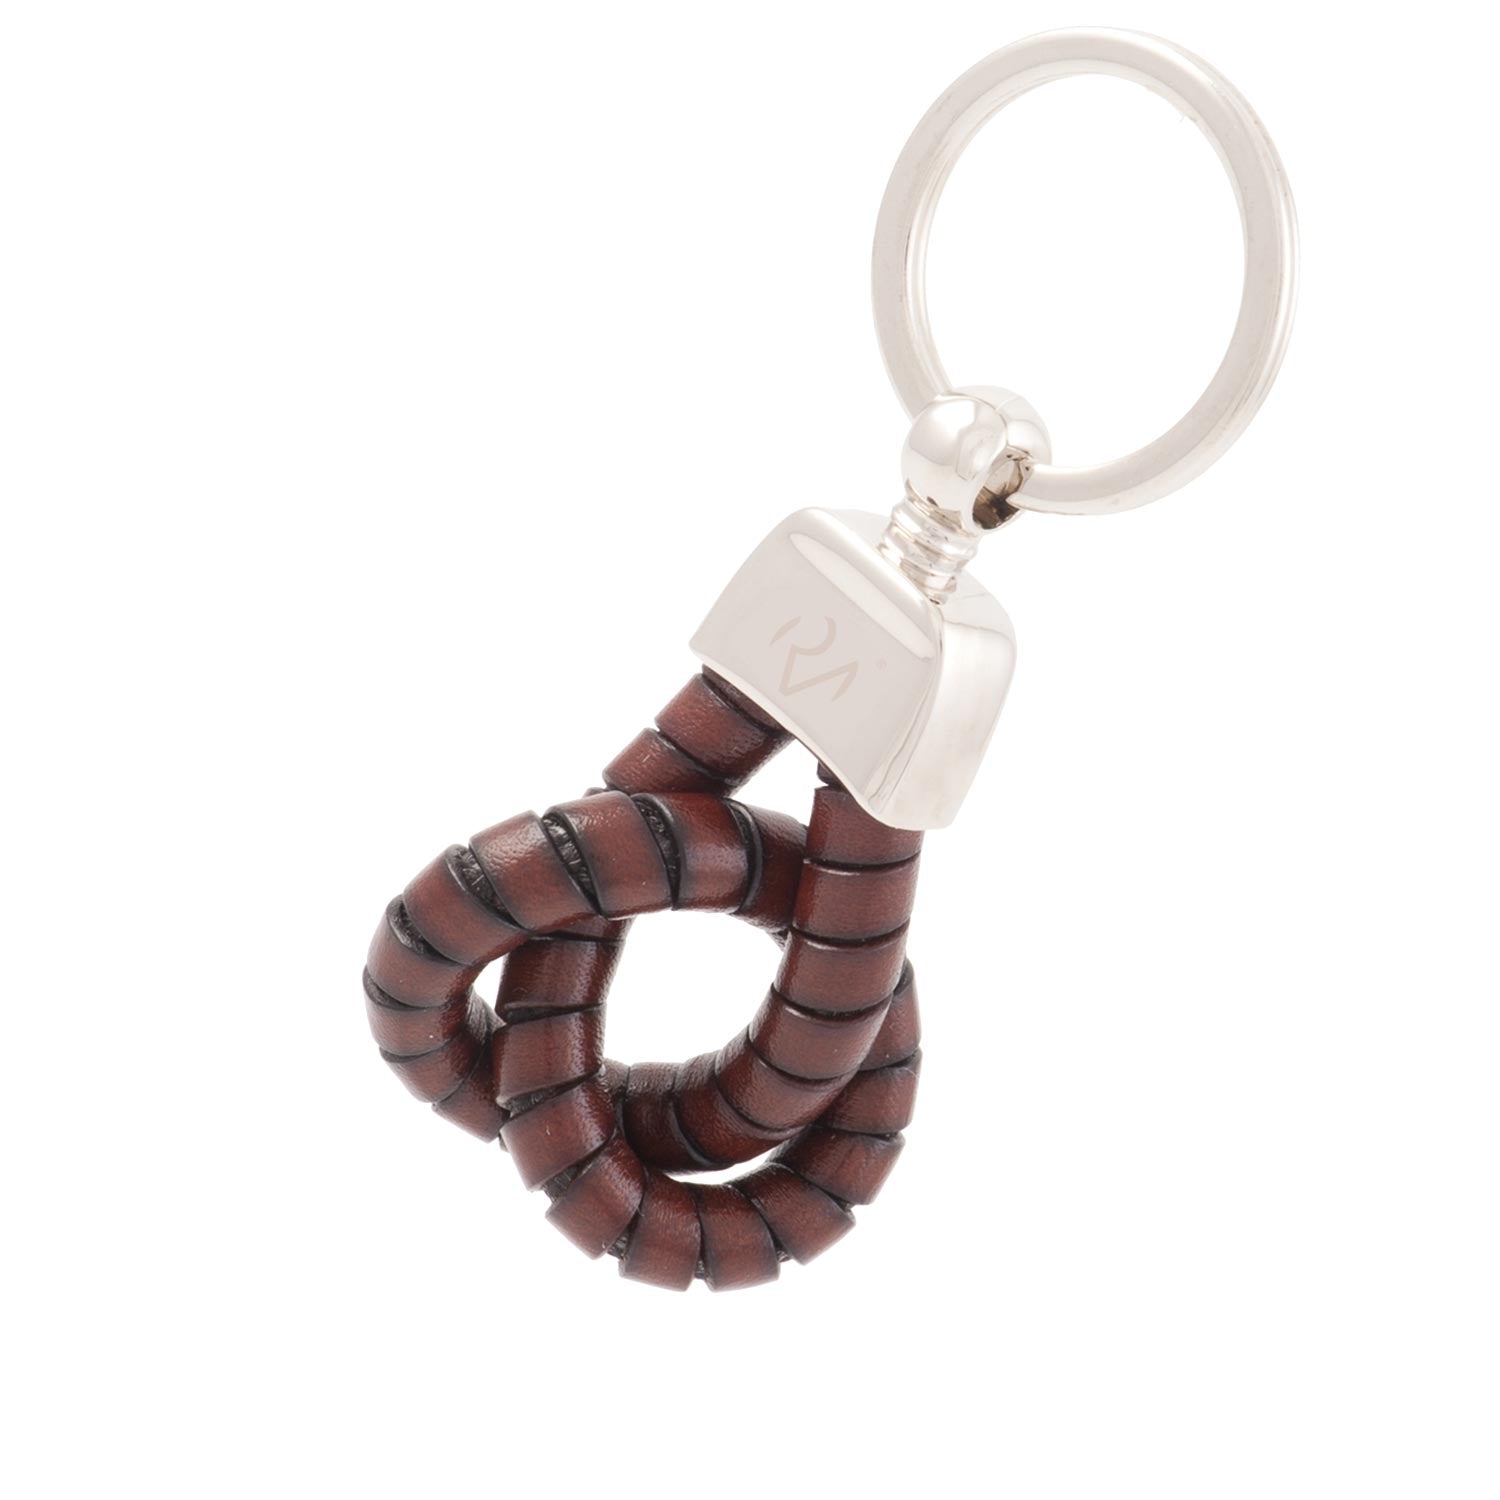 Wrapped leather knot key ring for men